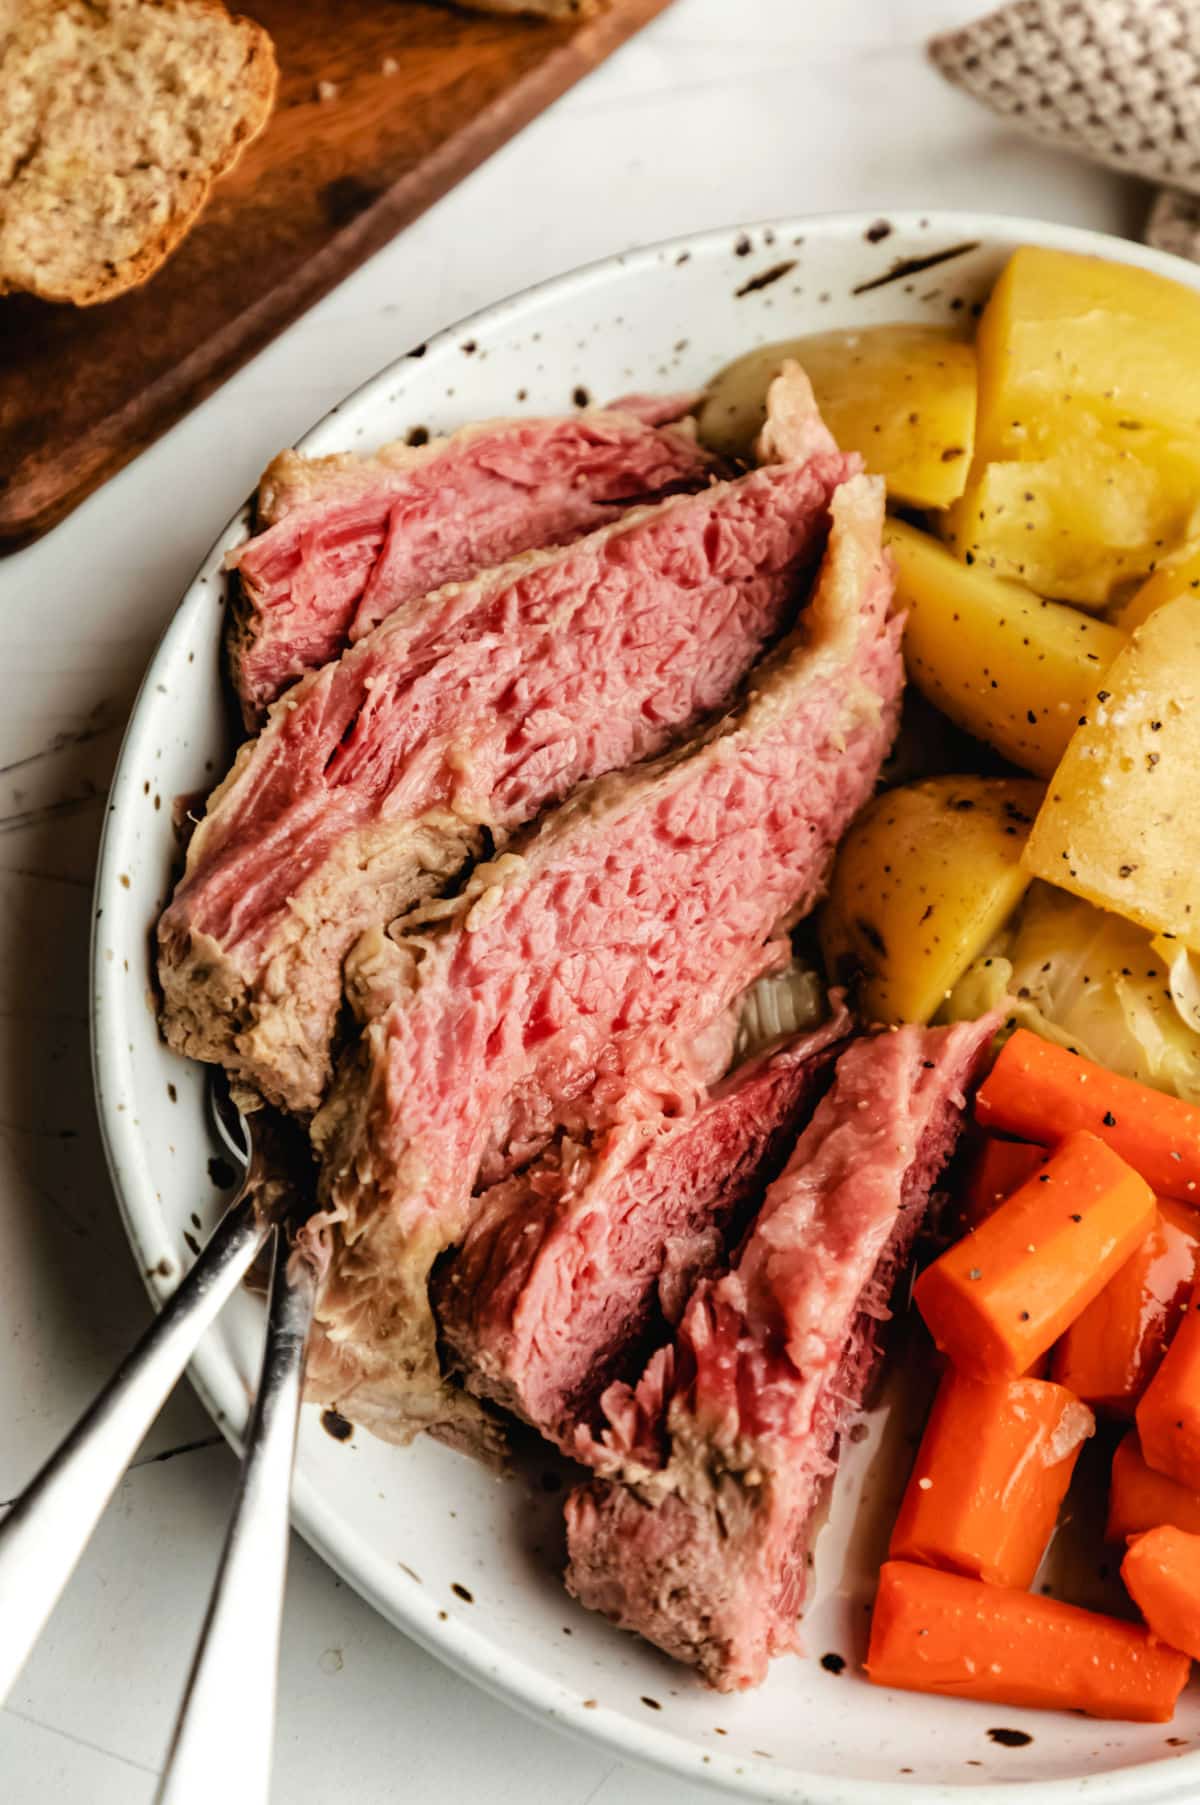 Slices of slow cooker corned beef next to carrots and potatoes.